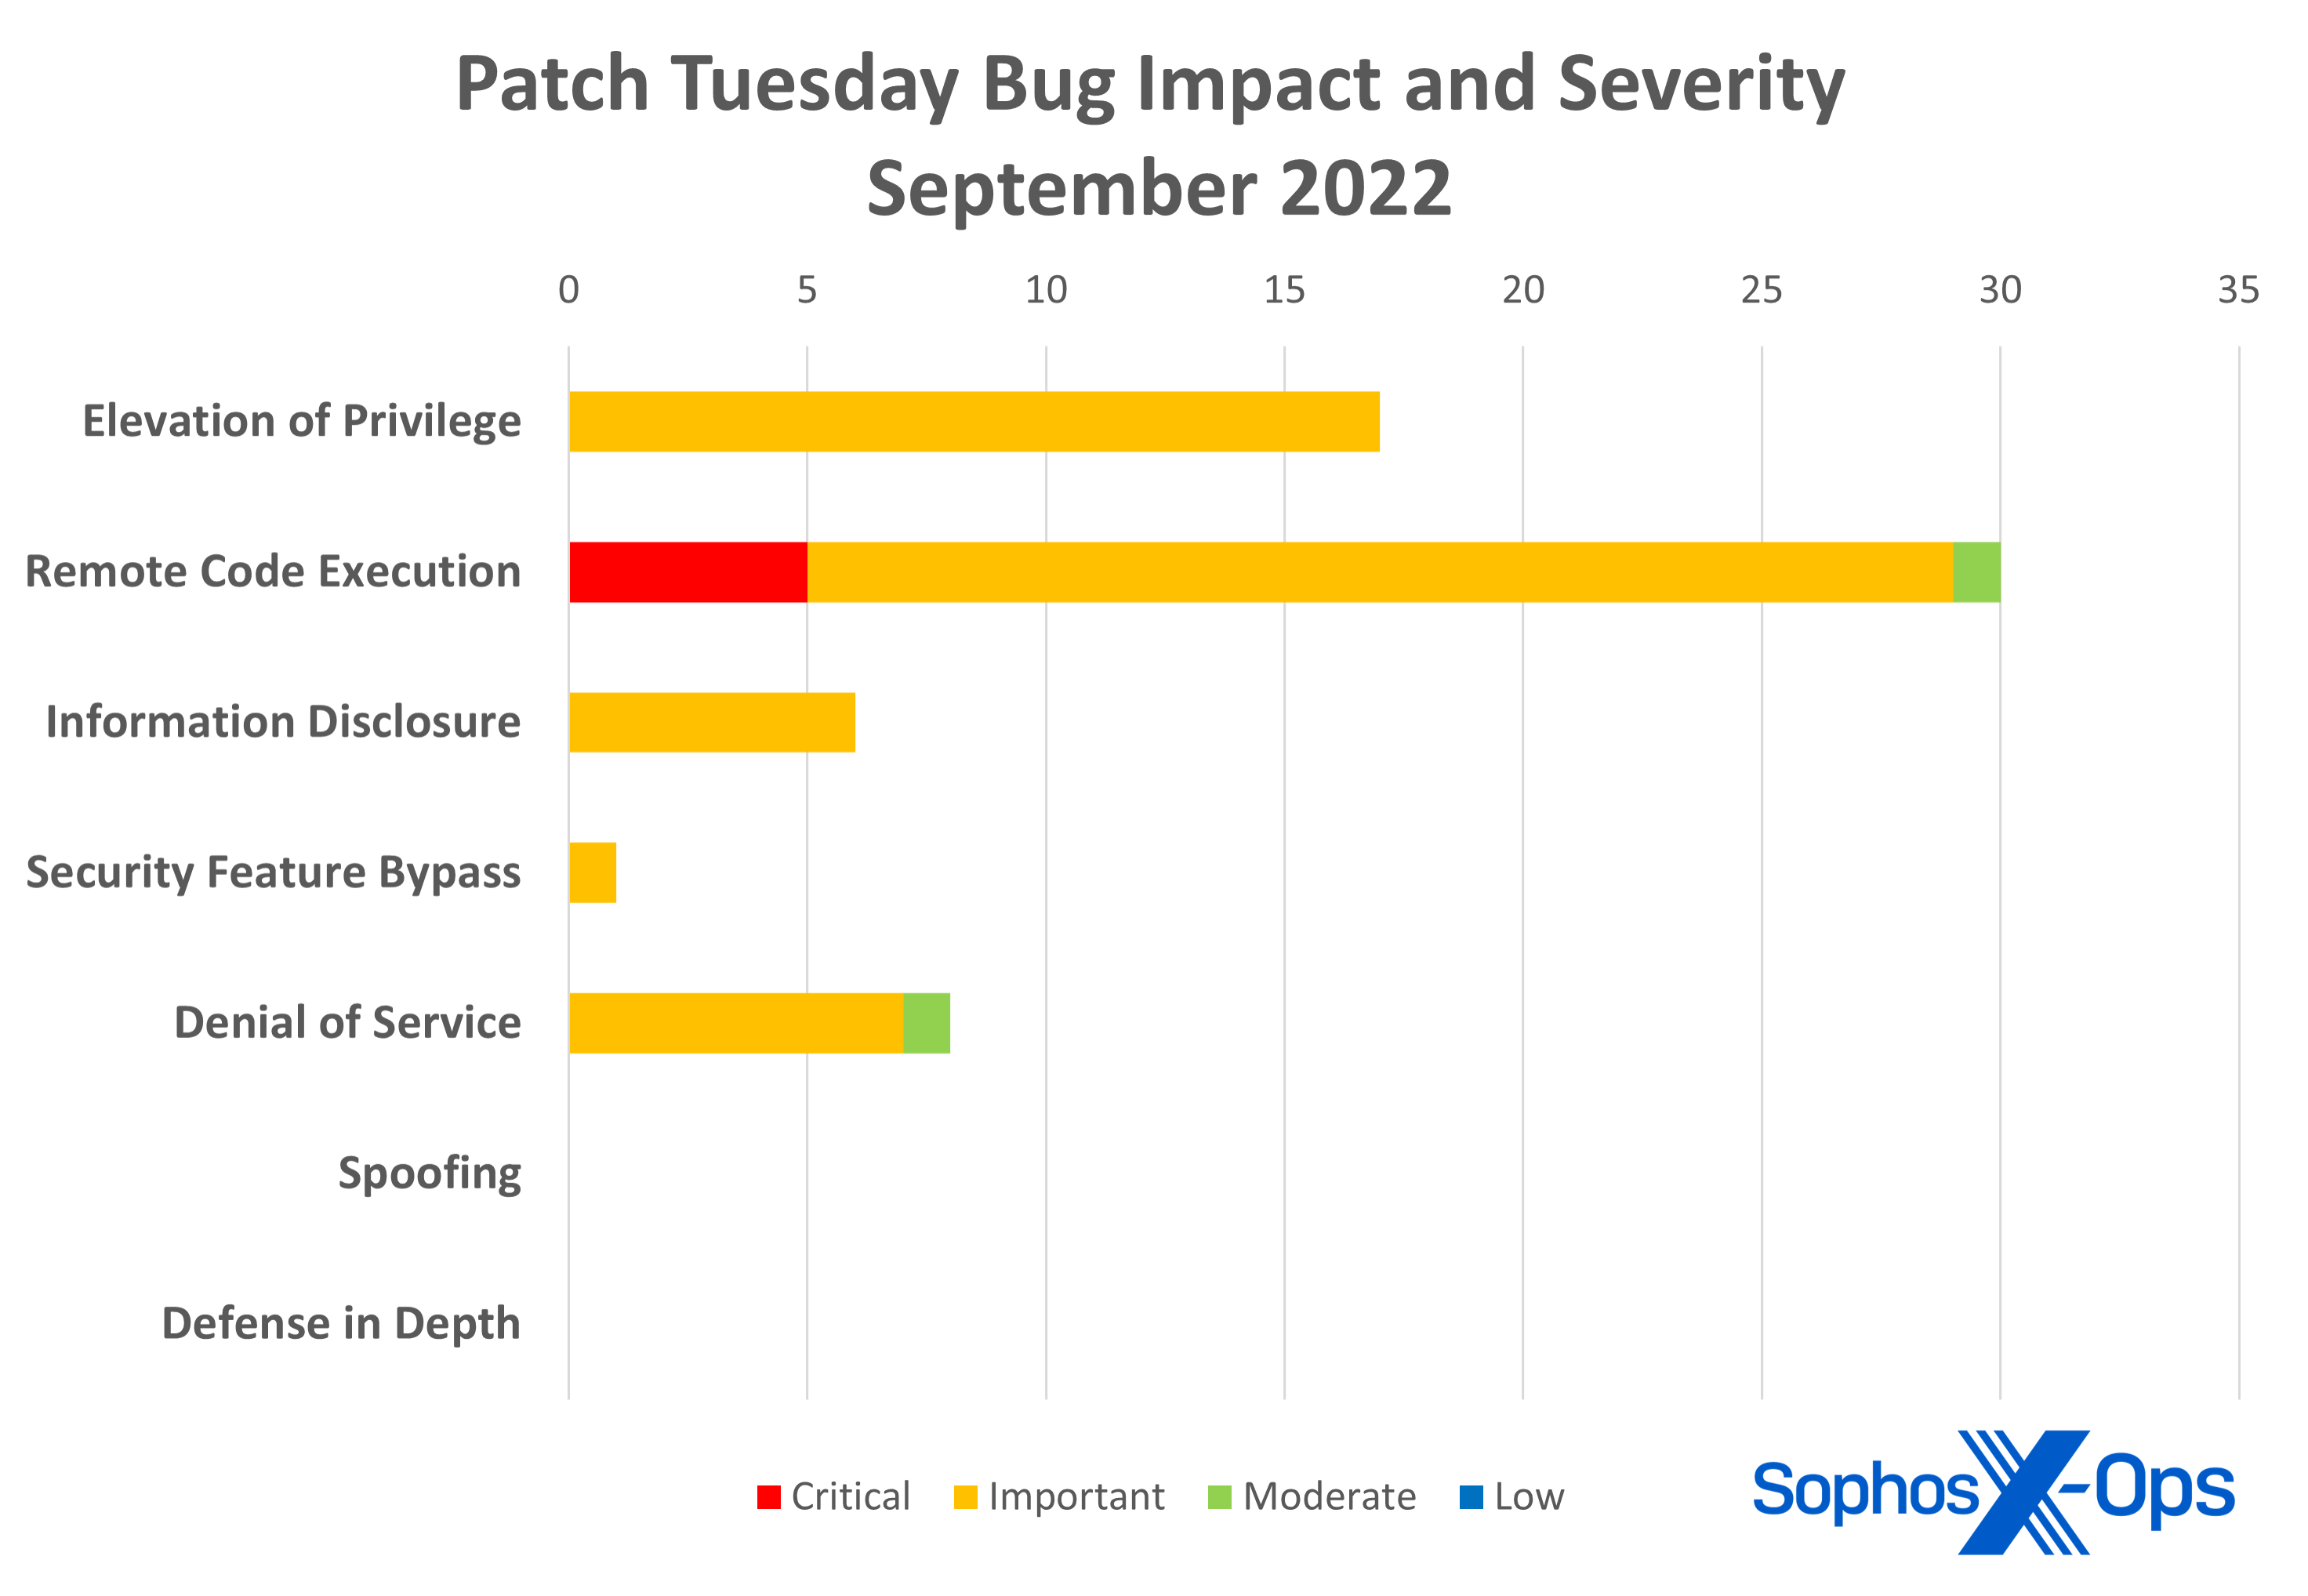 Bar chart showing impact and severity for vulnerabilities in the September 2022 Patch Tuesday release